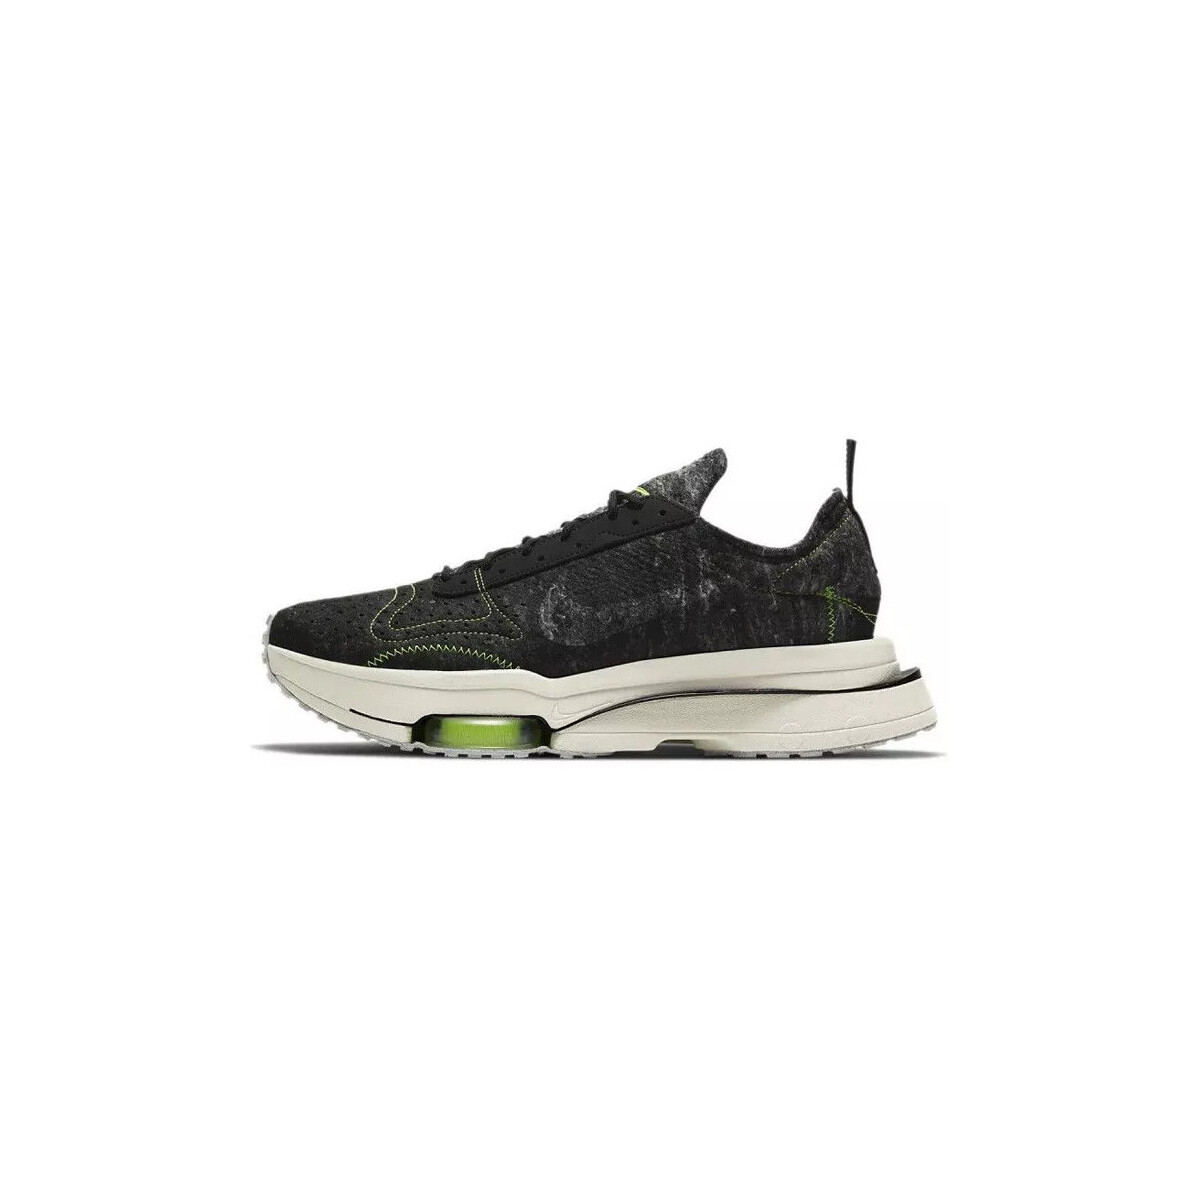 Chaussures Homme Baskets basses Nike AIR ZOOM TYPE Noir